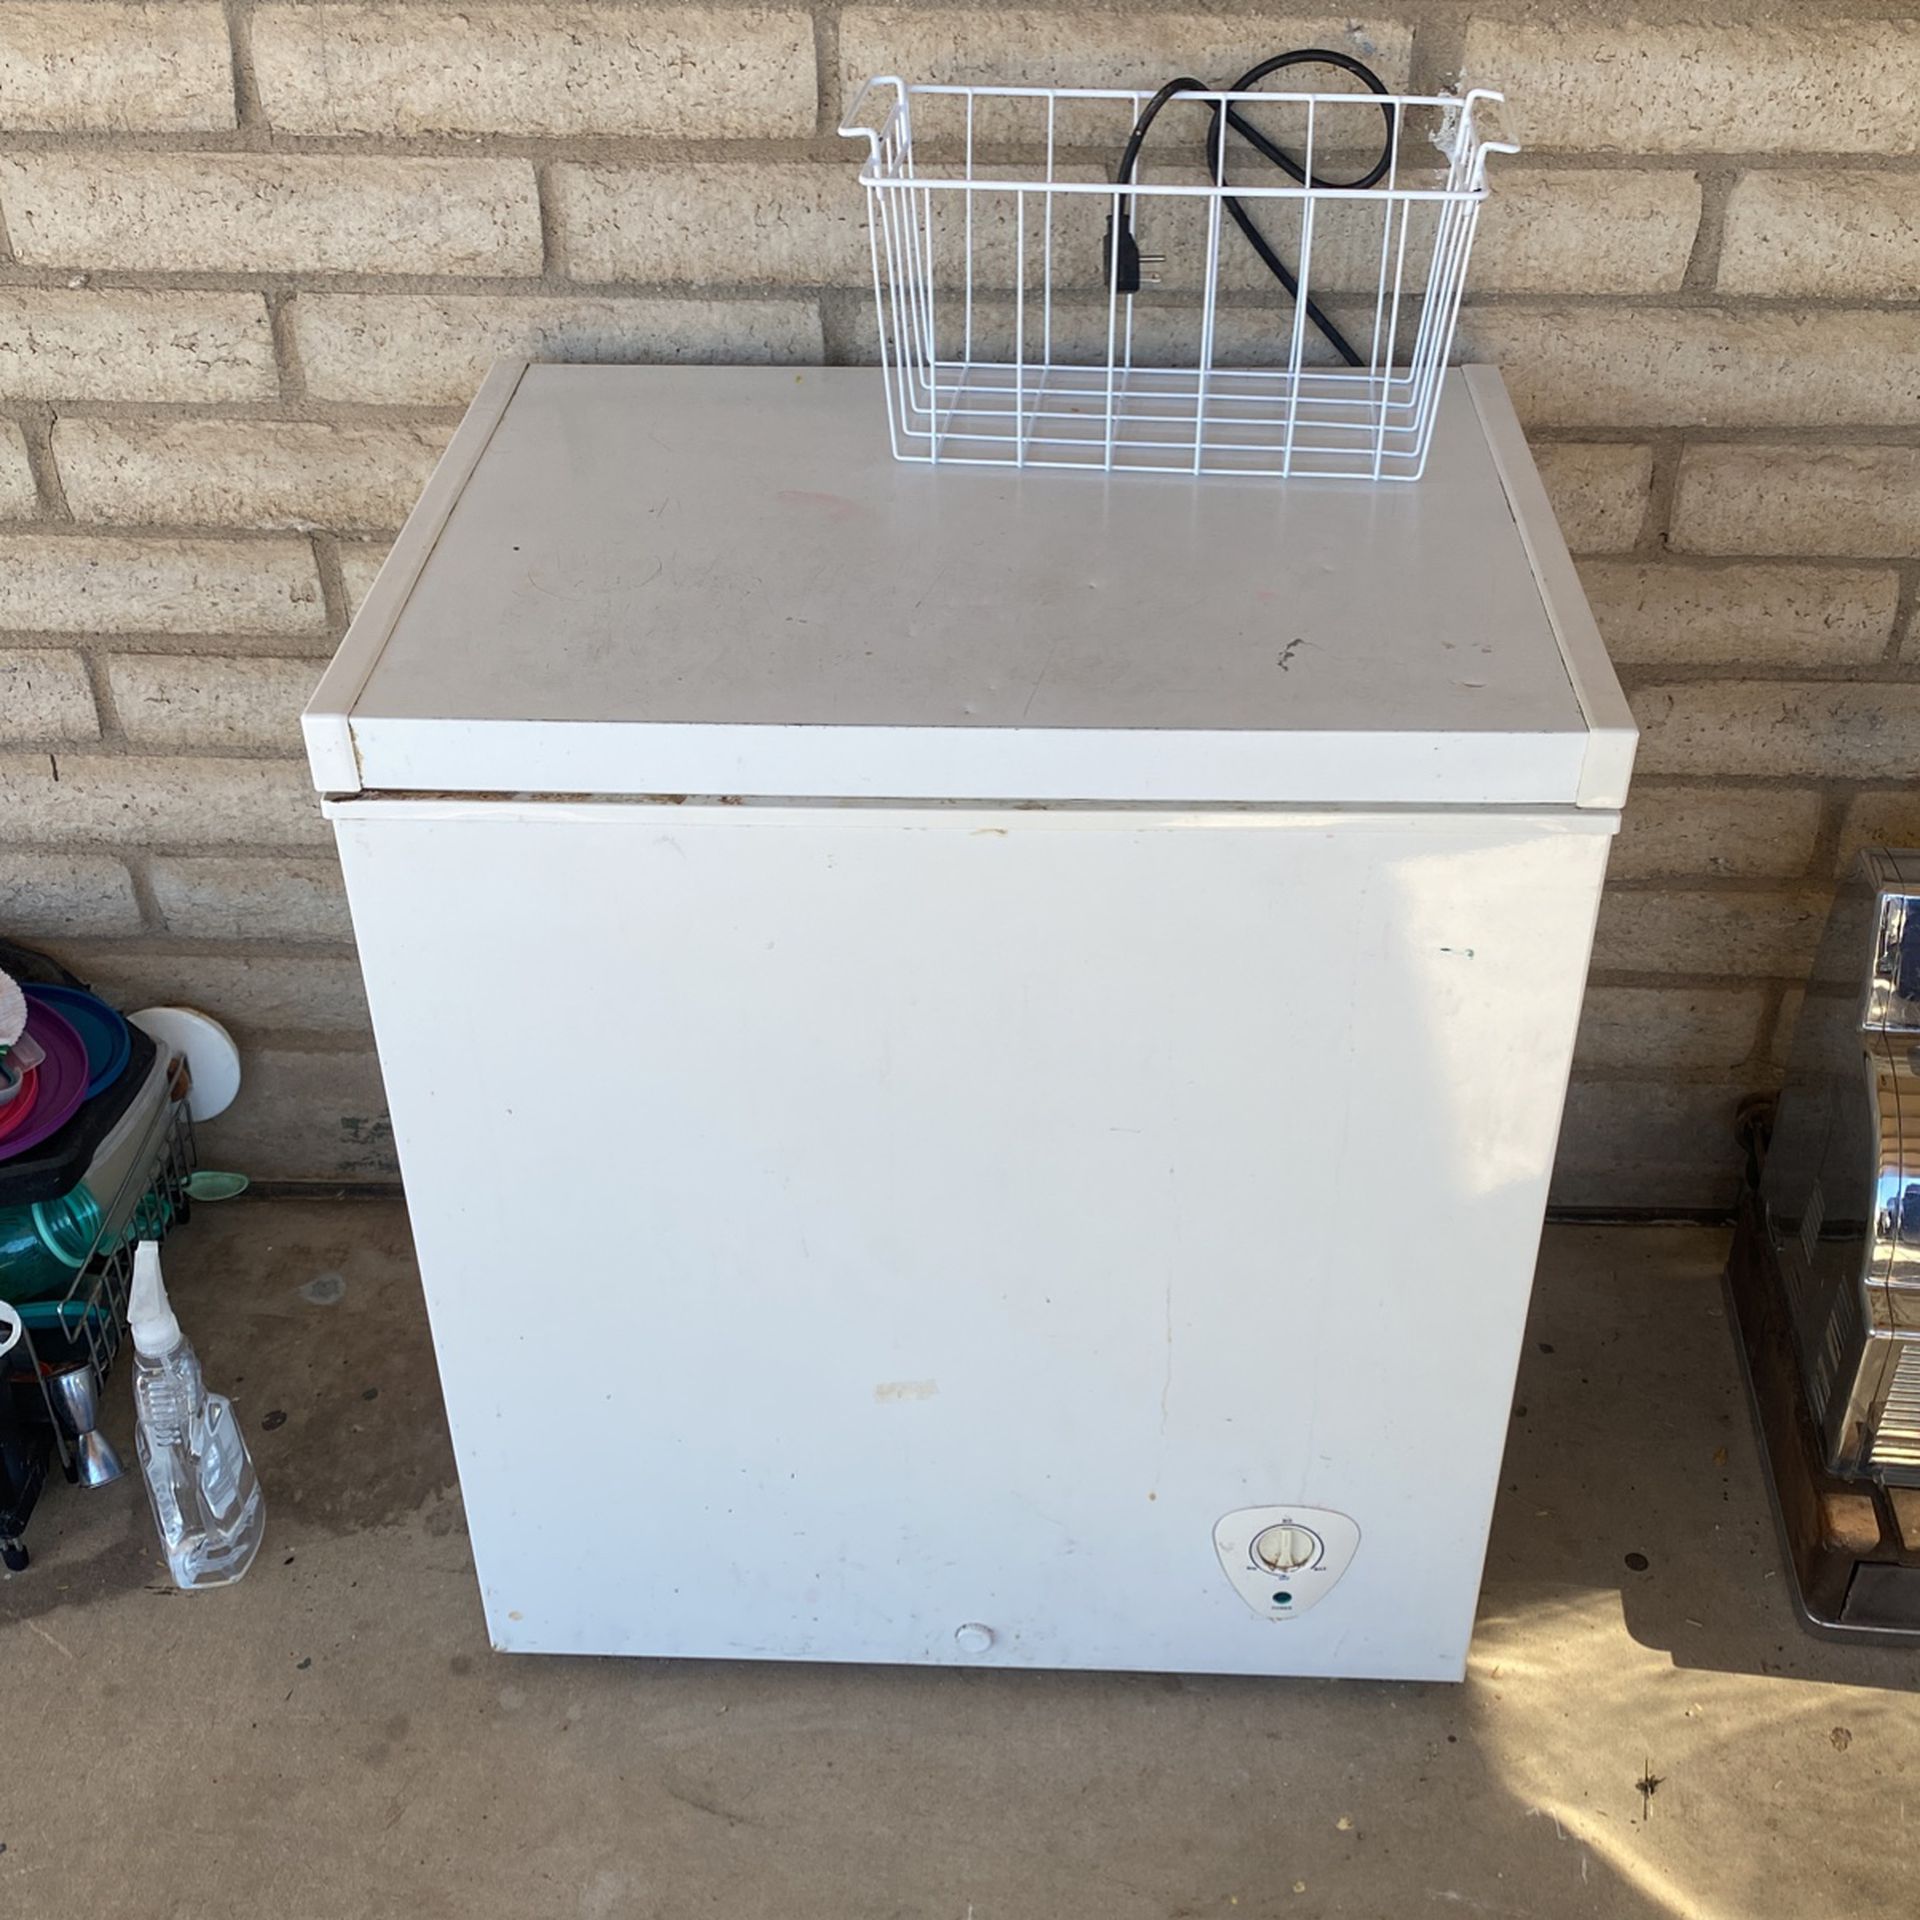 Fry Daddy for Sale in Tucson, AZ - OfferUp